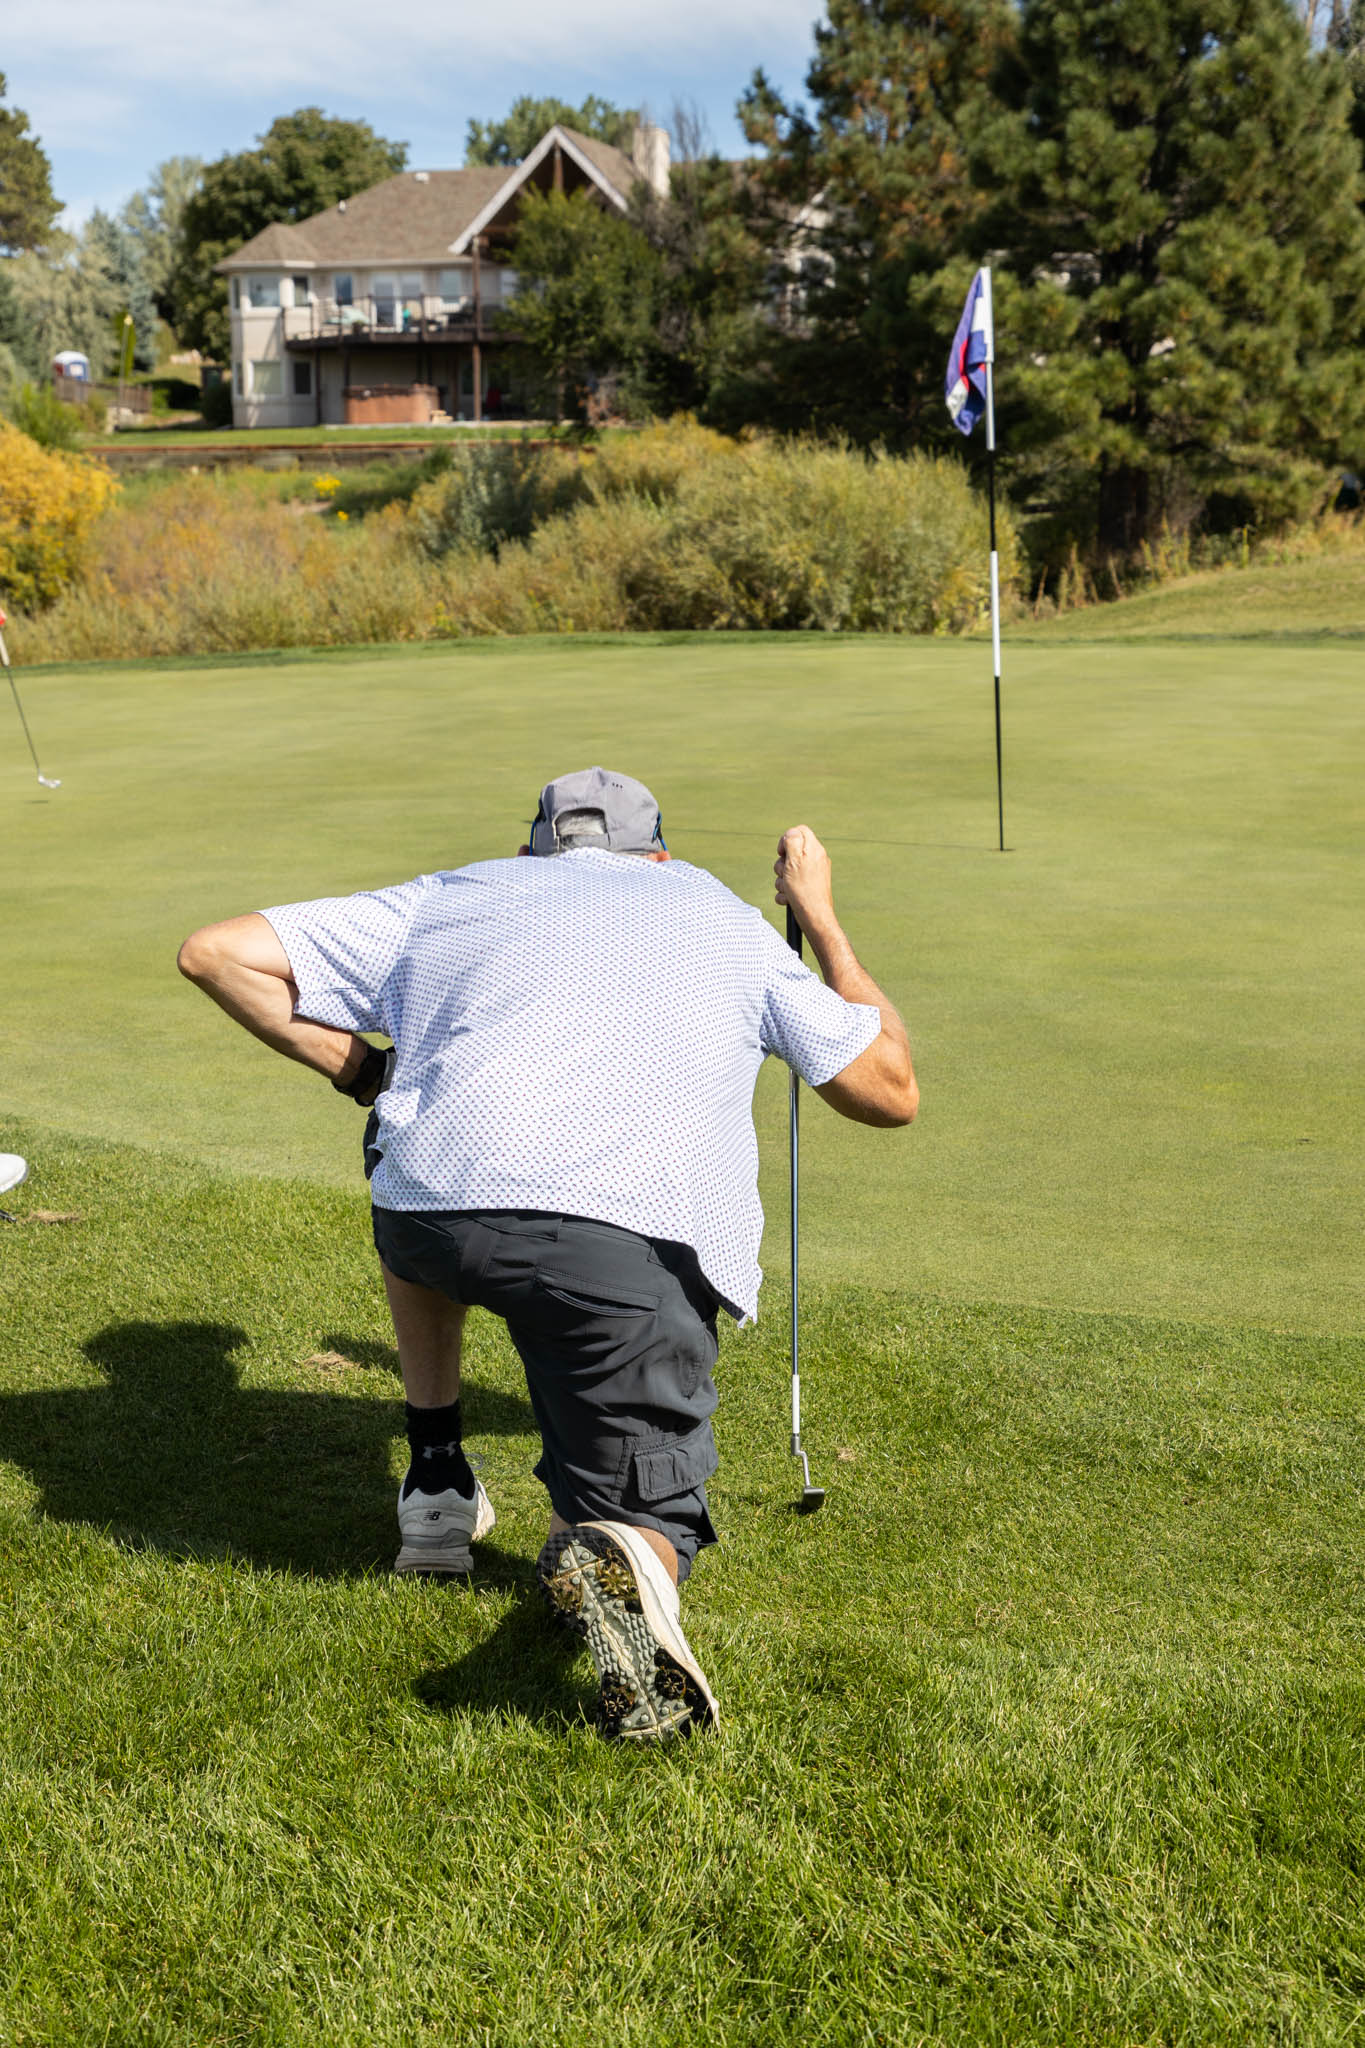 A man crouching down on a golf course.